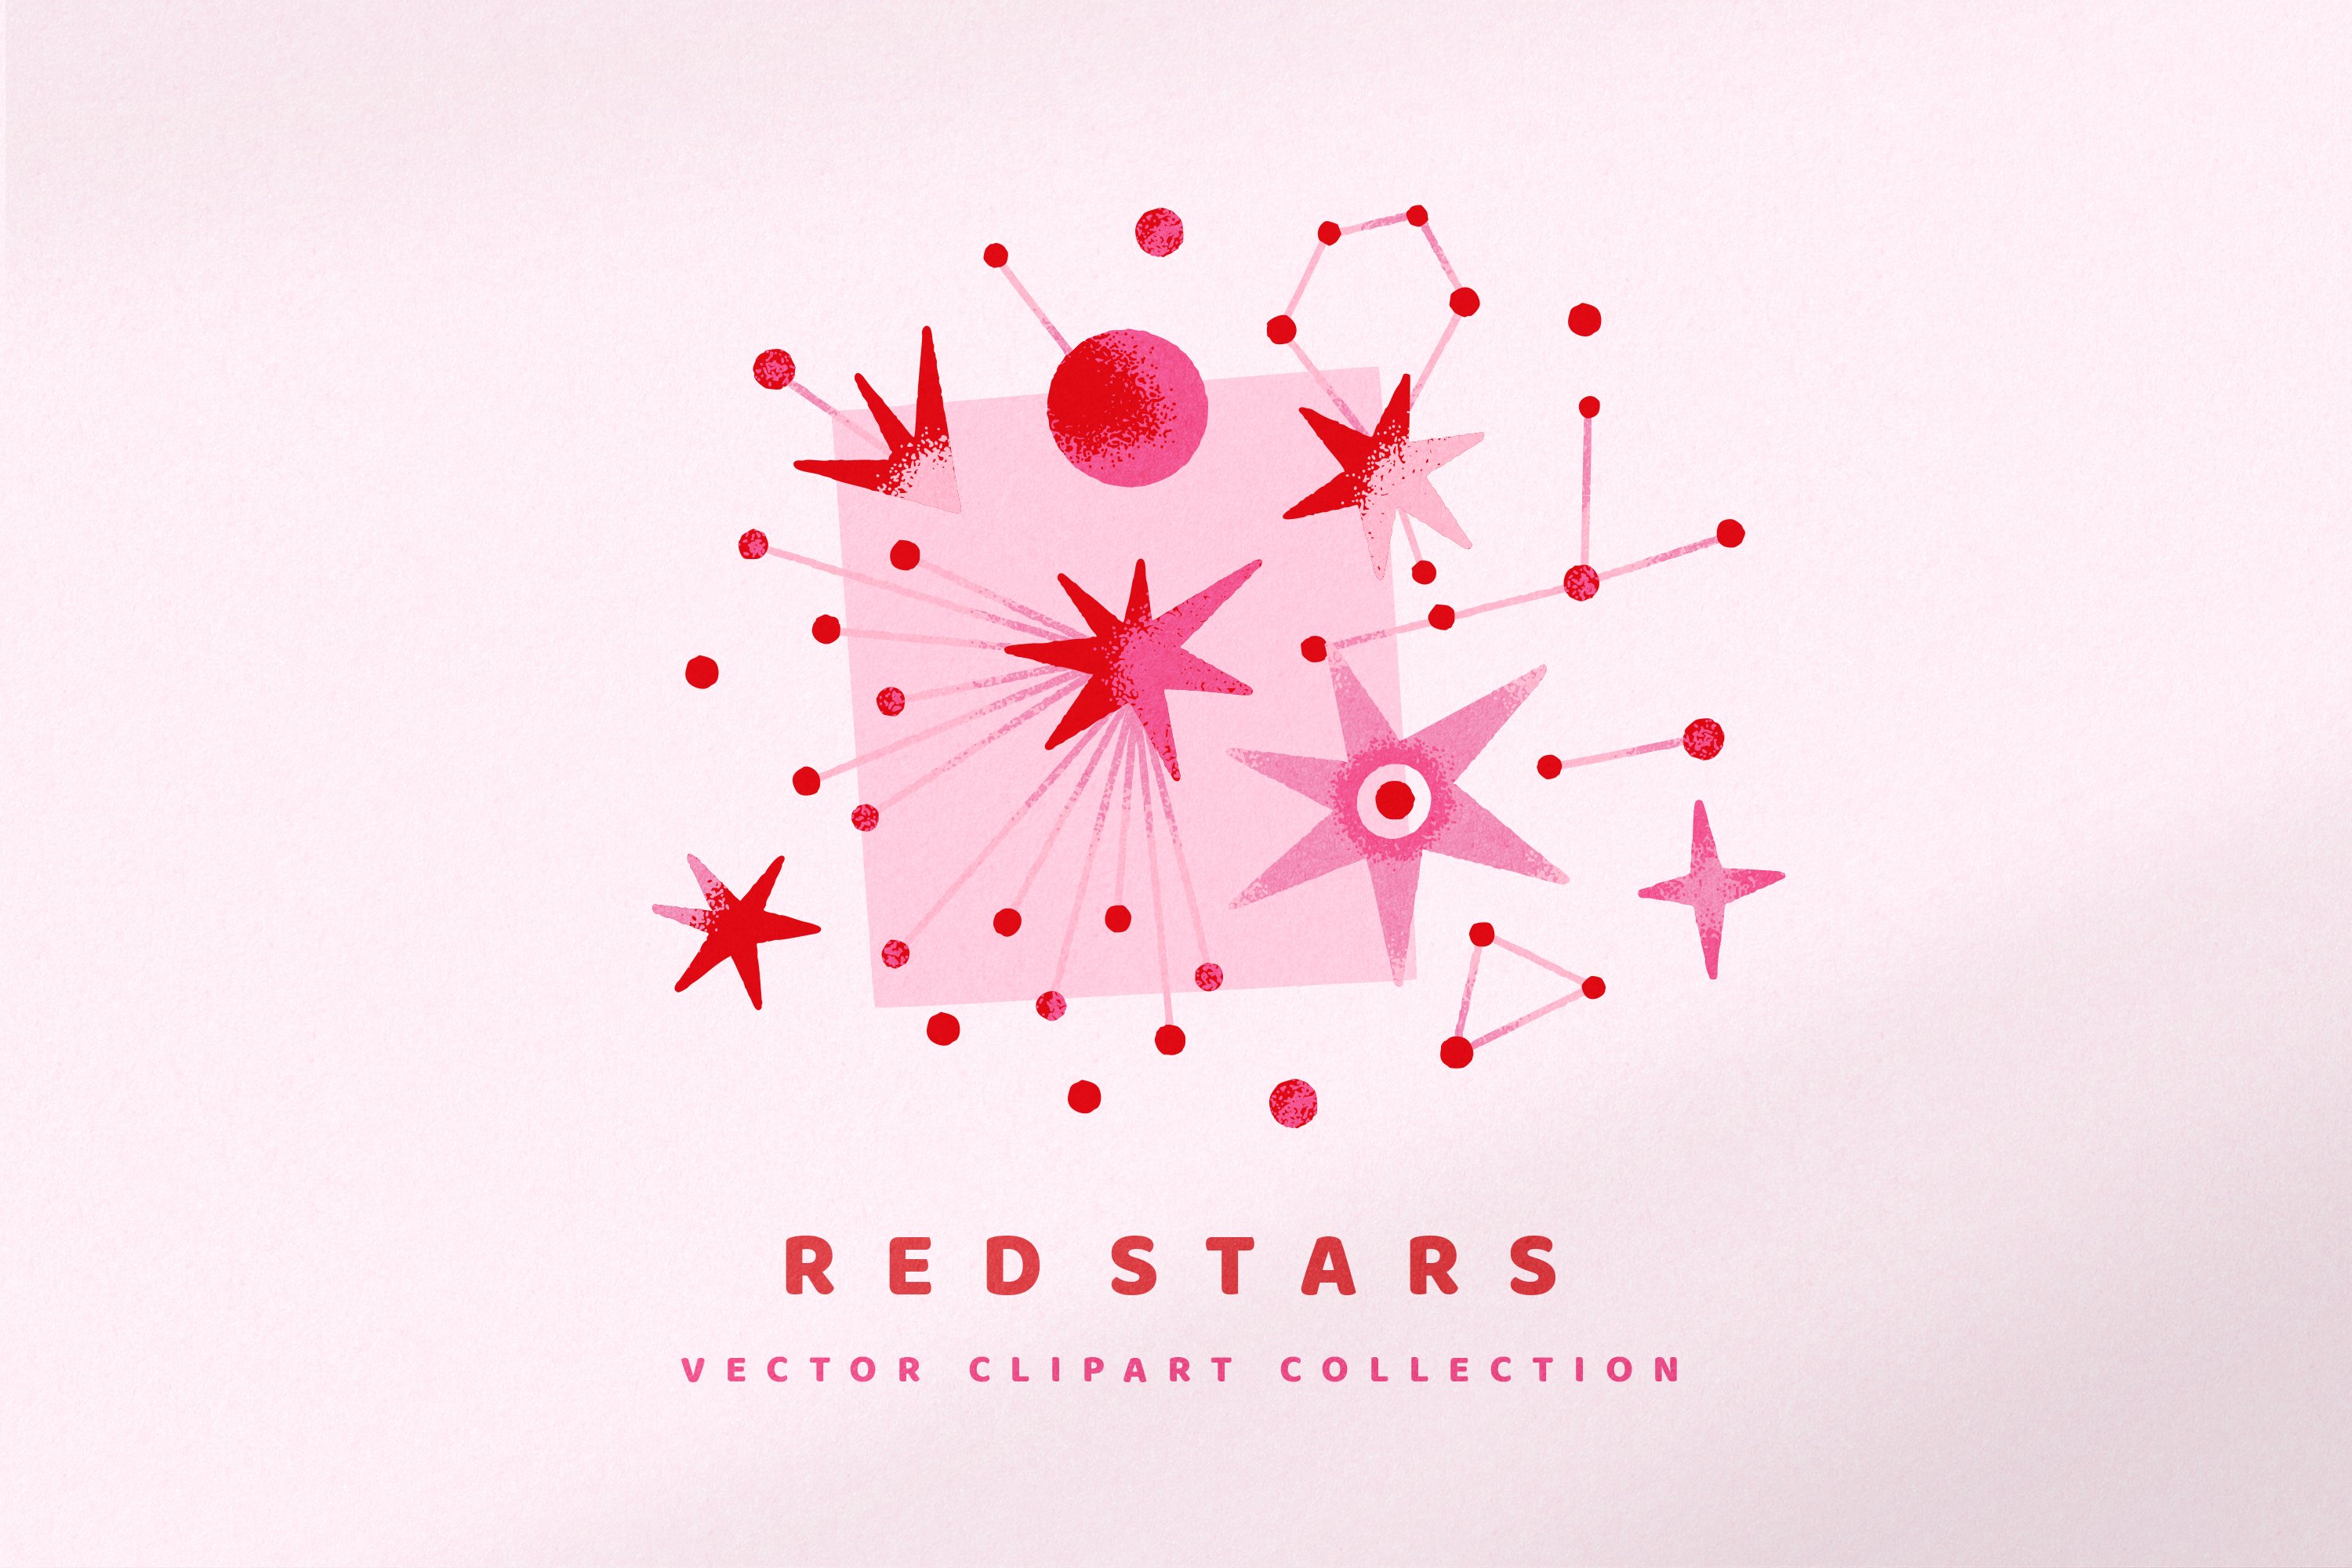 Red Stars - Clipart Collection cover image.